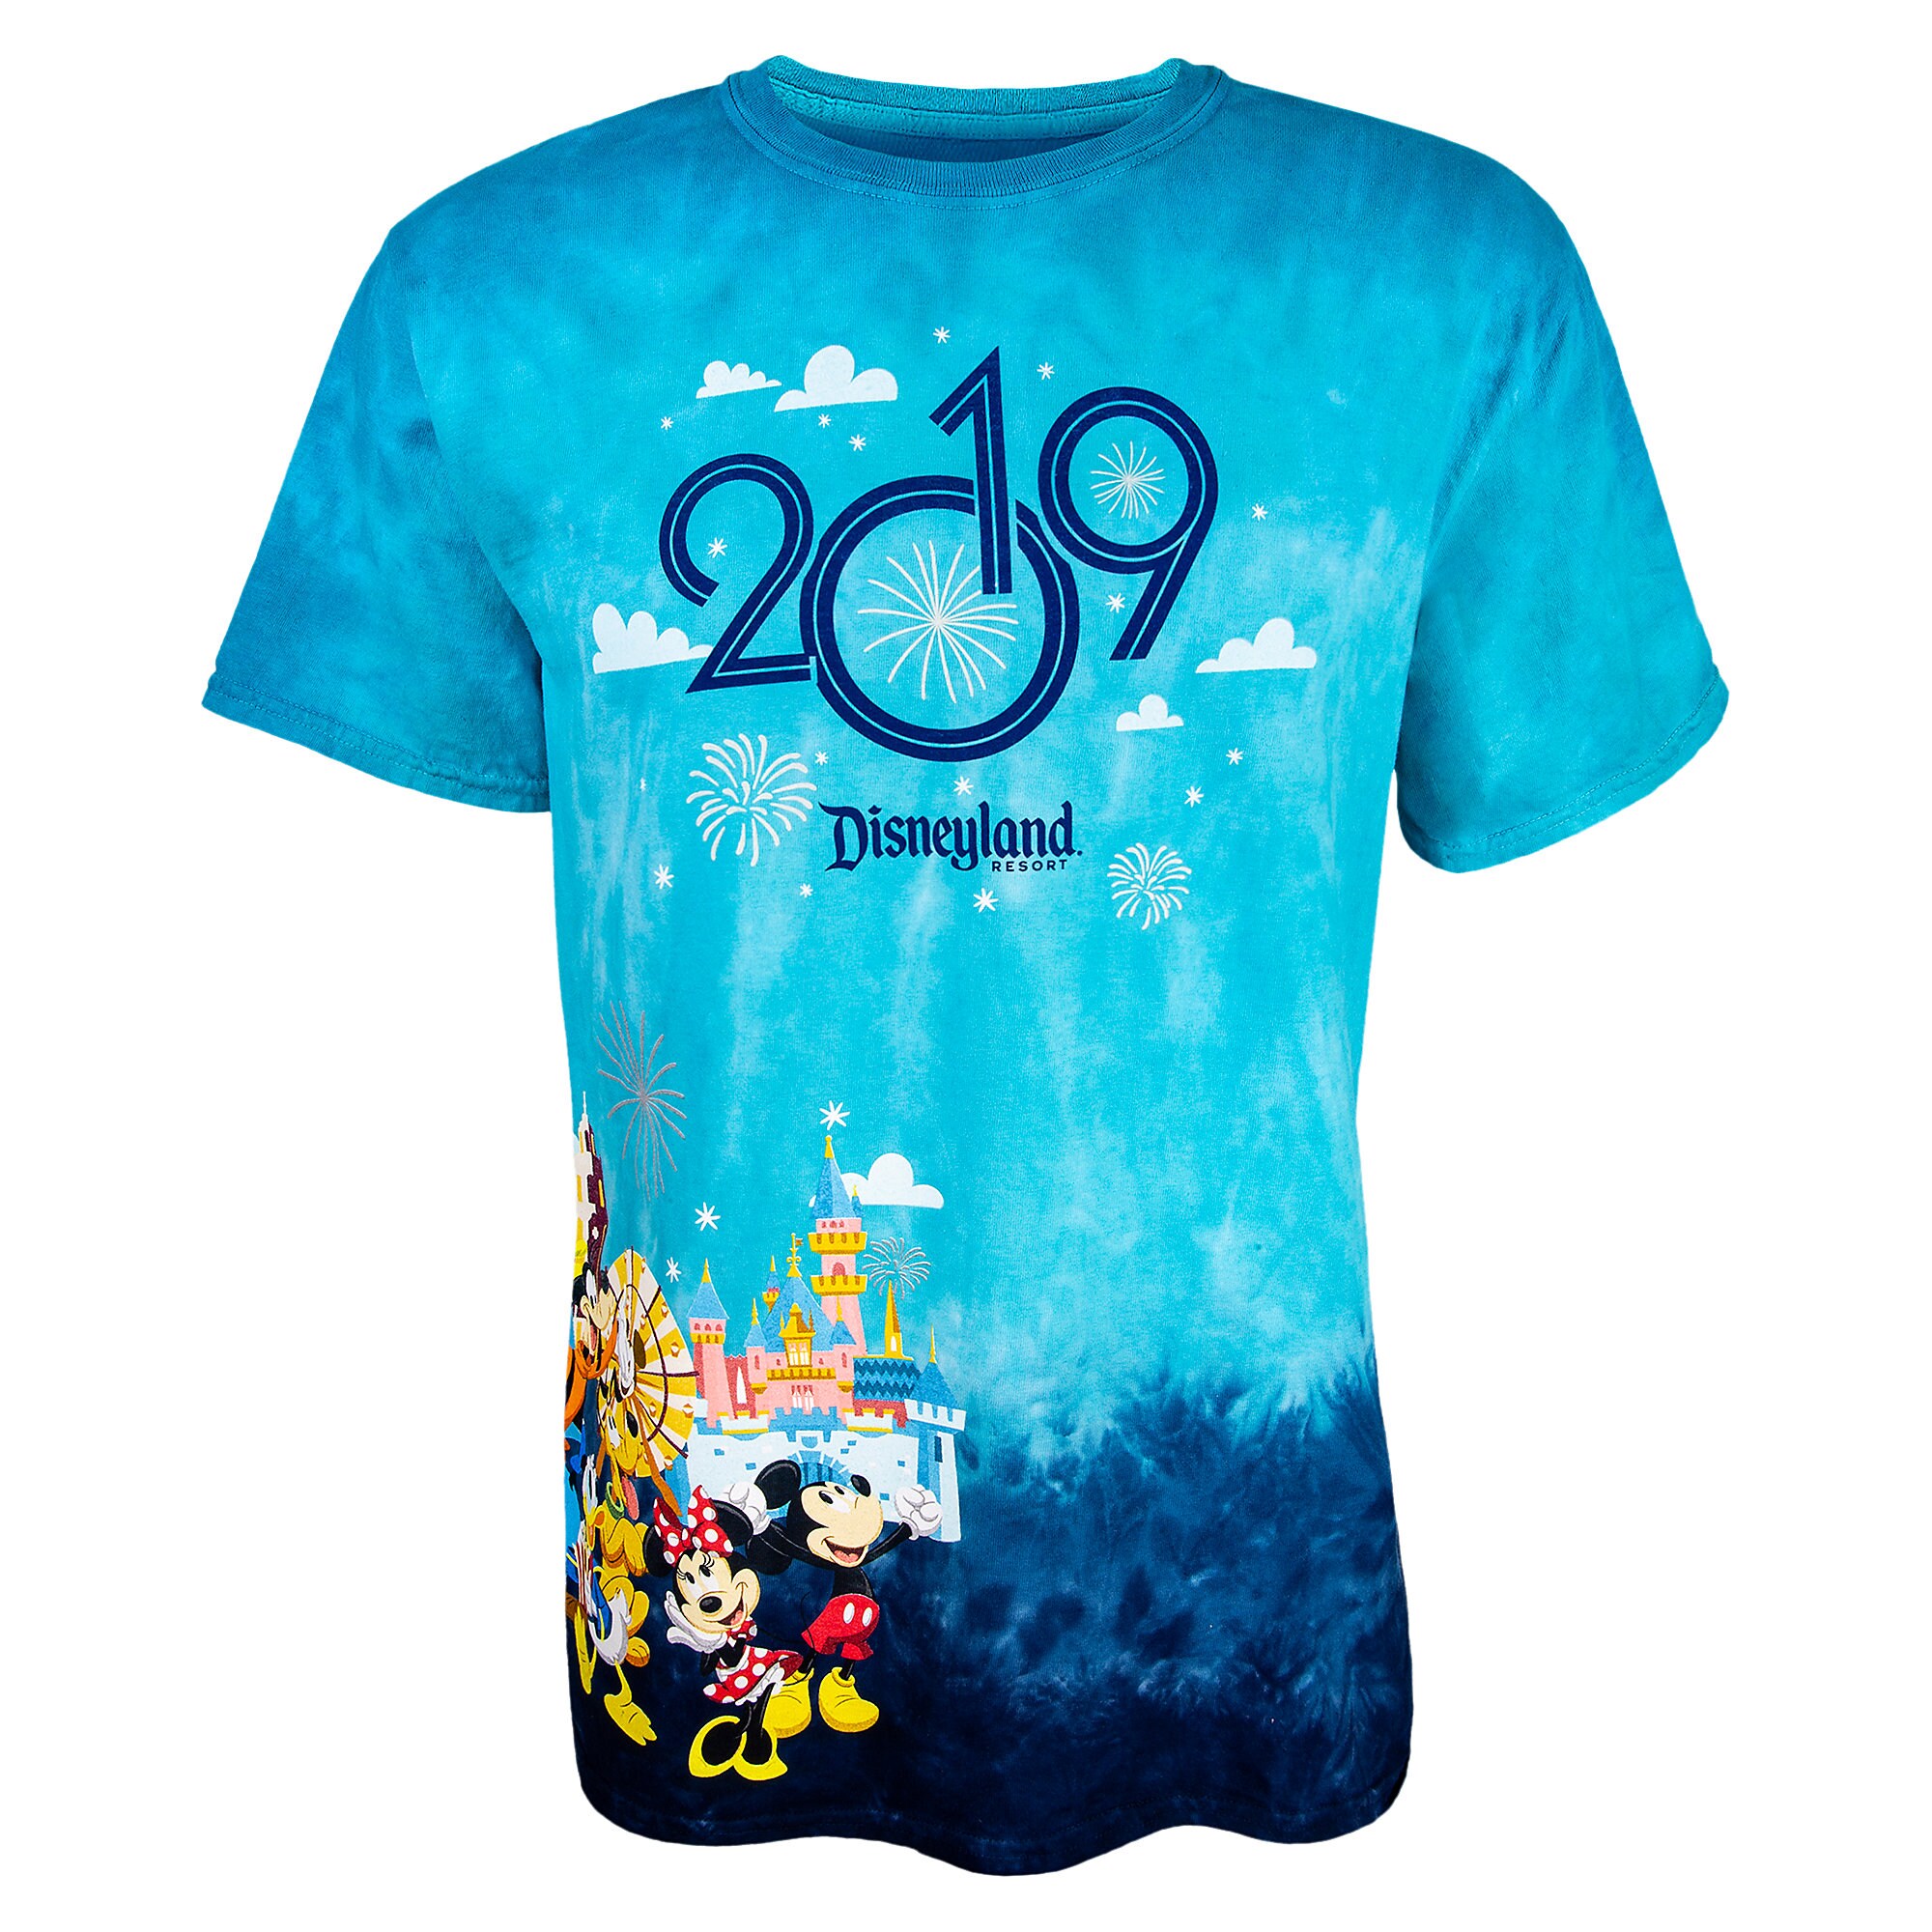 Mickey Mouse and Friends Tie-Dye T-Shirt for Adults - Disneyland 2019